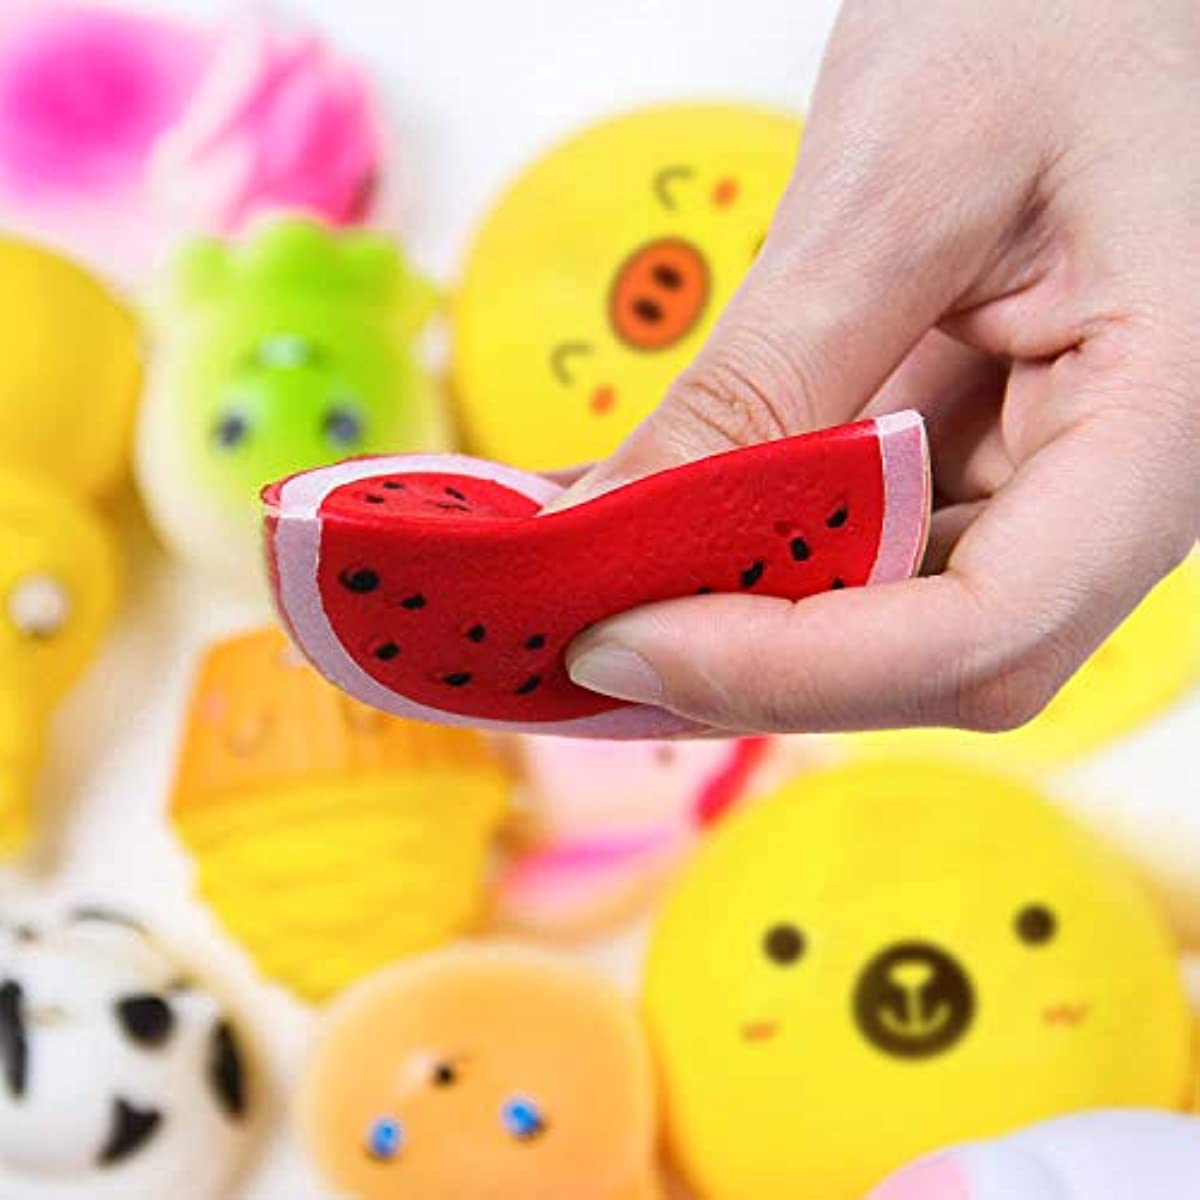 Random Squeeze Toys Cream Scented Slow Rising Kawaii Squeeze Toys Medium Mini Size Simulation Lovely Toy Phone Straps Goodie Bag Egg Filler